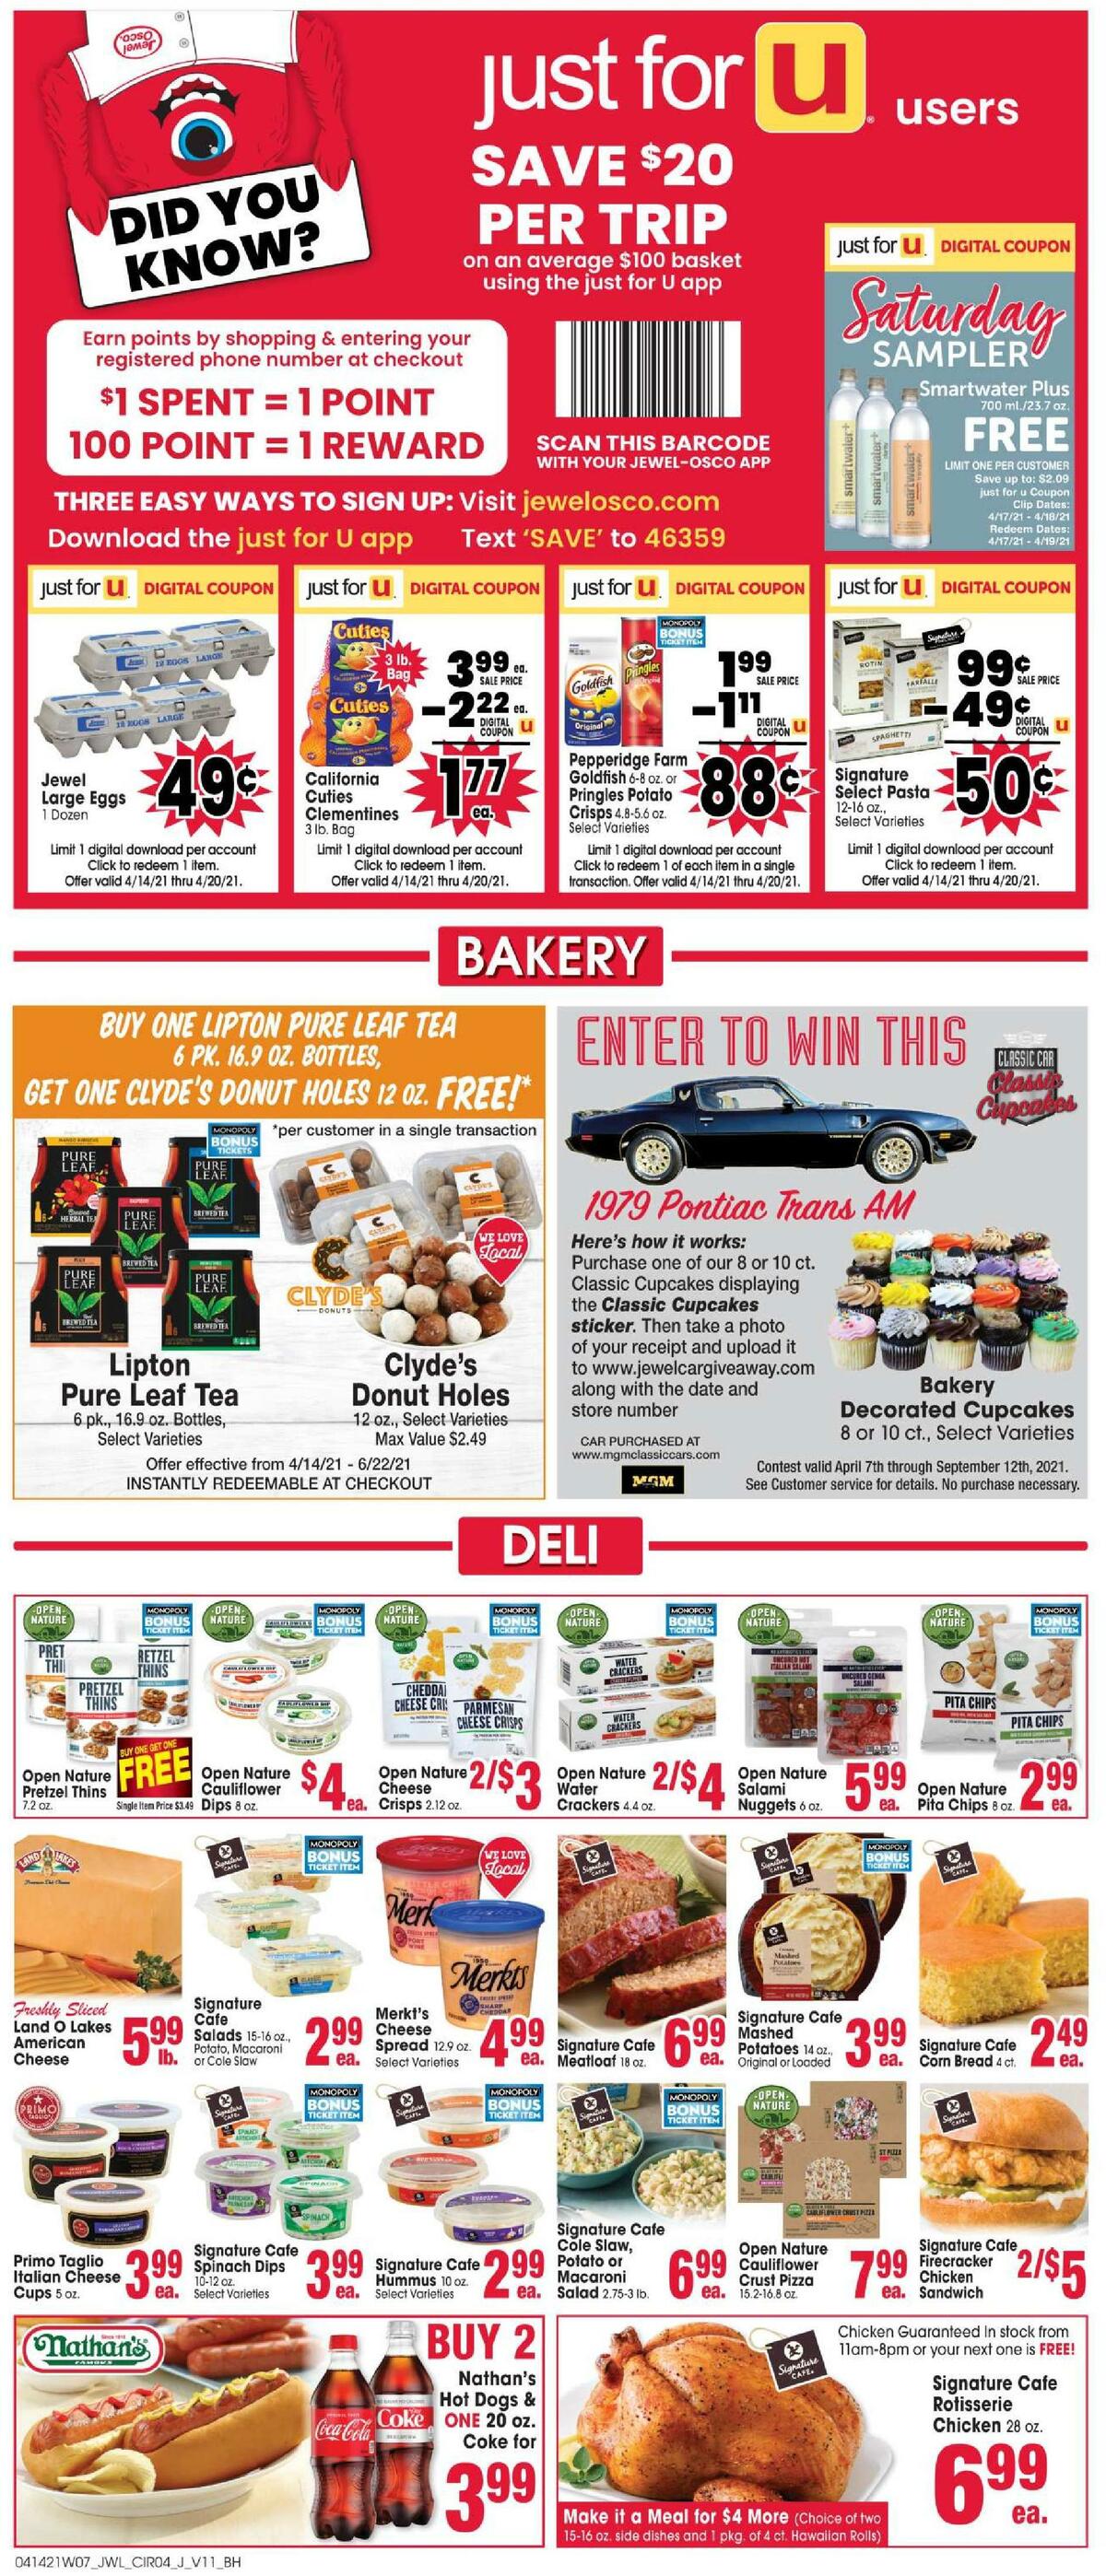 Jewel Osco Weekly Ad from April 14